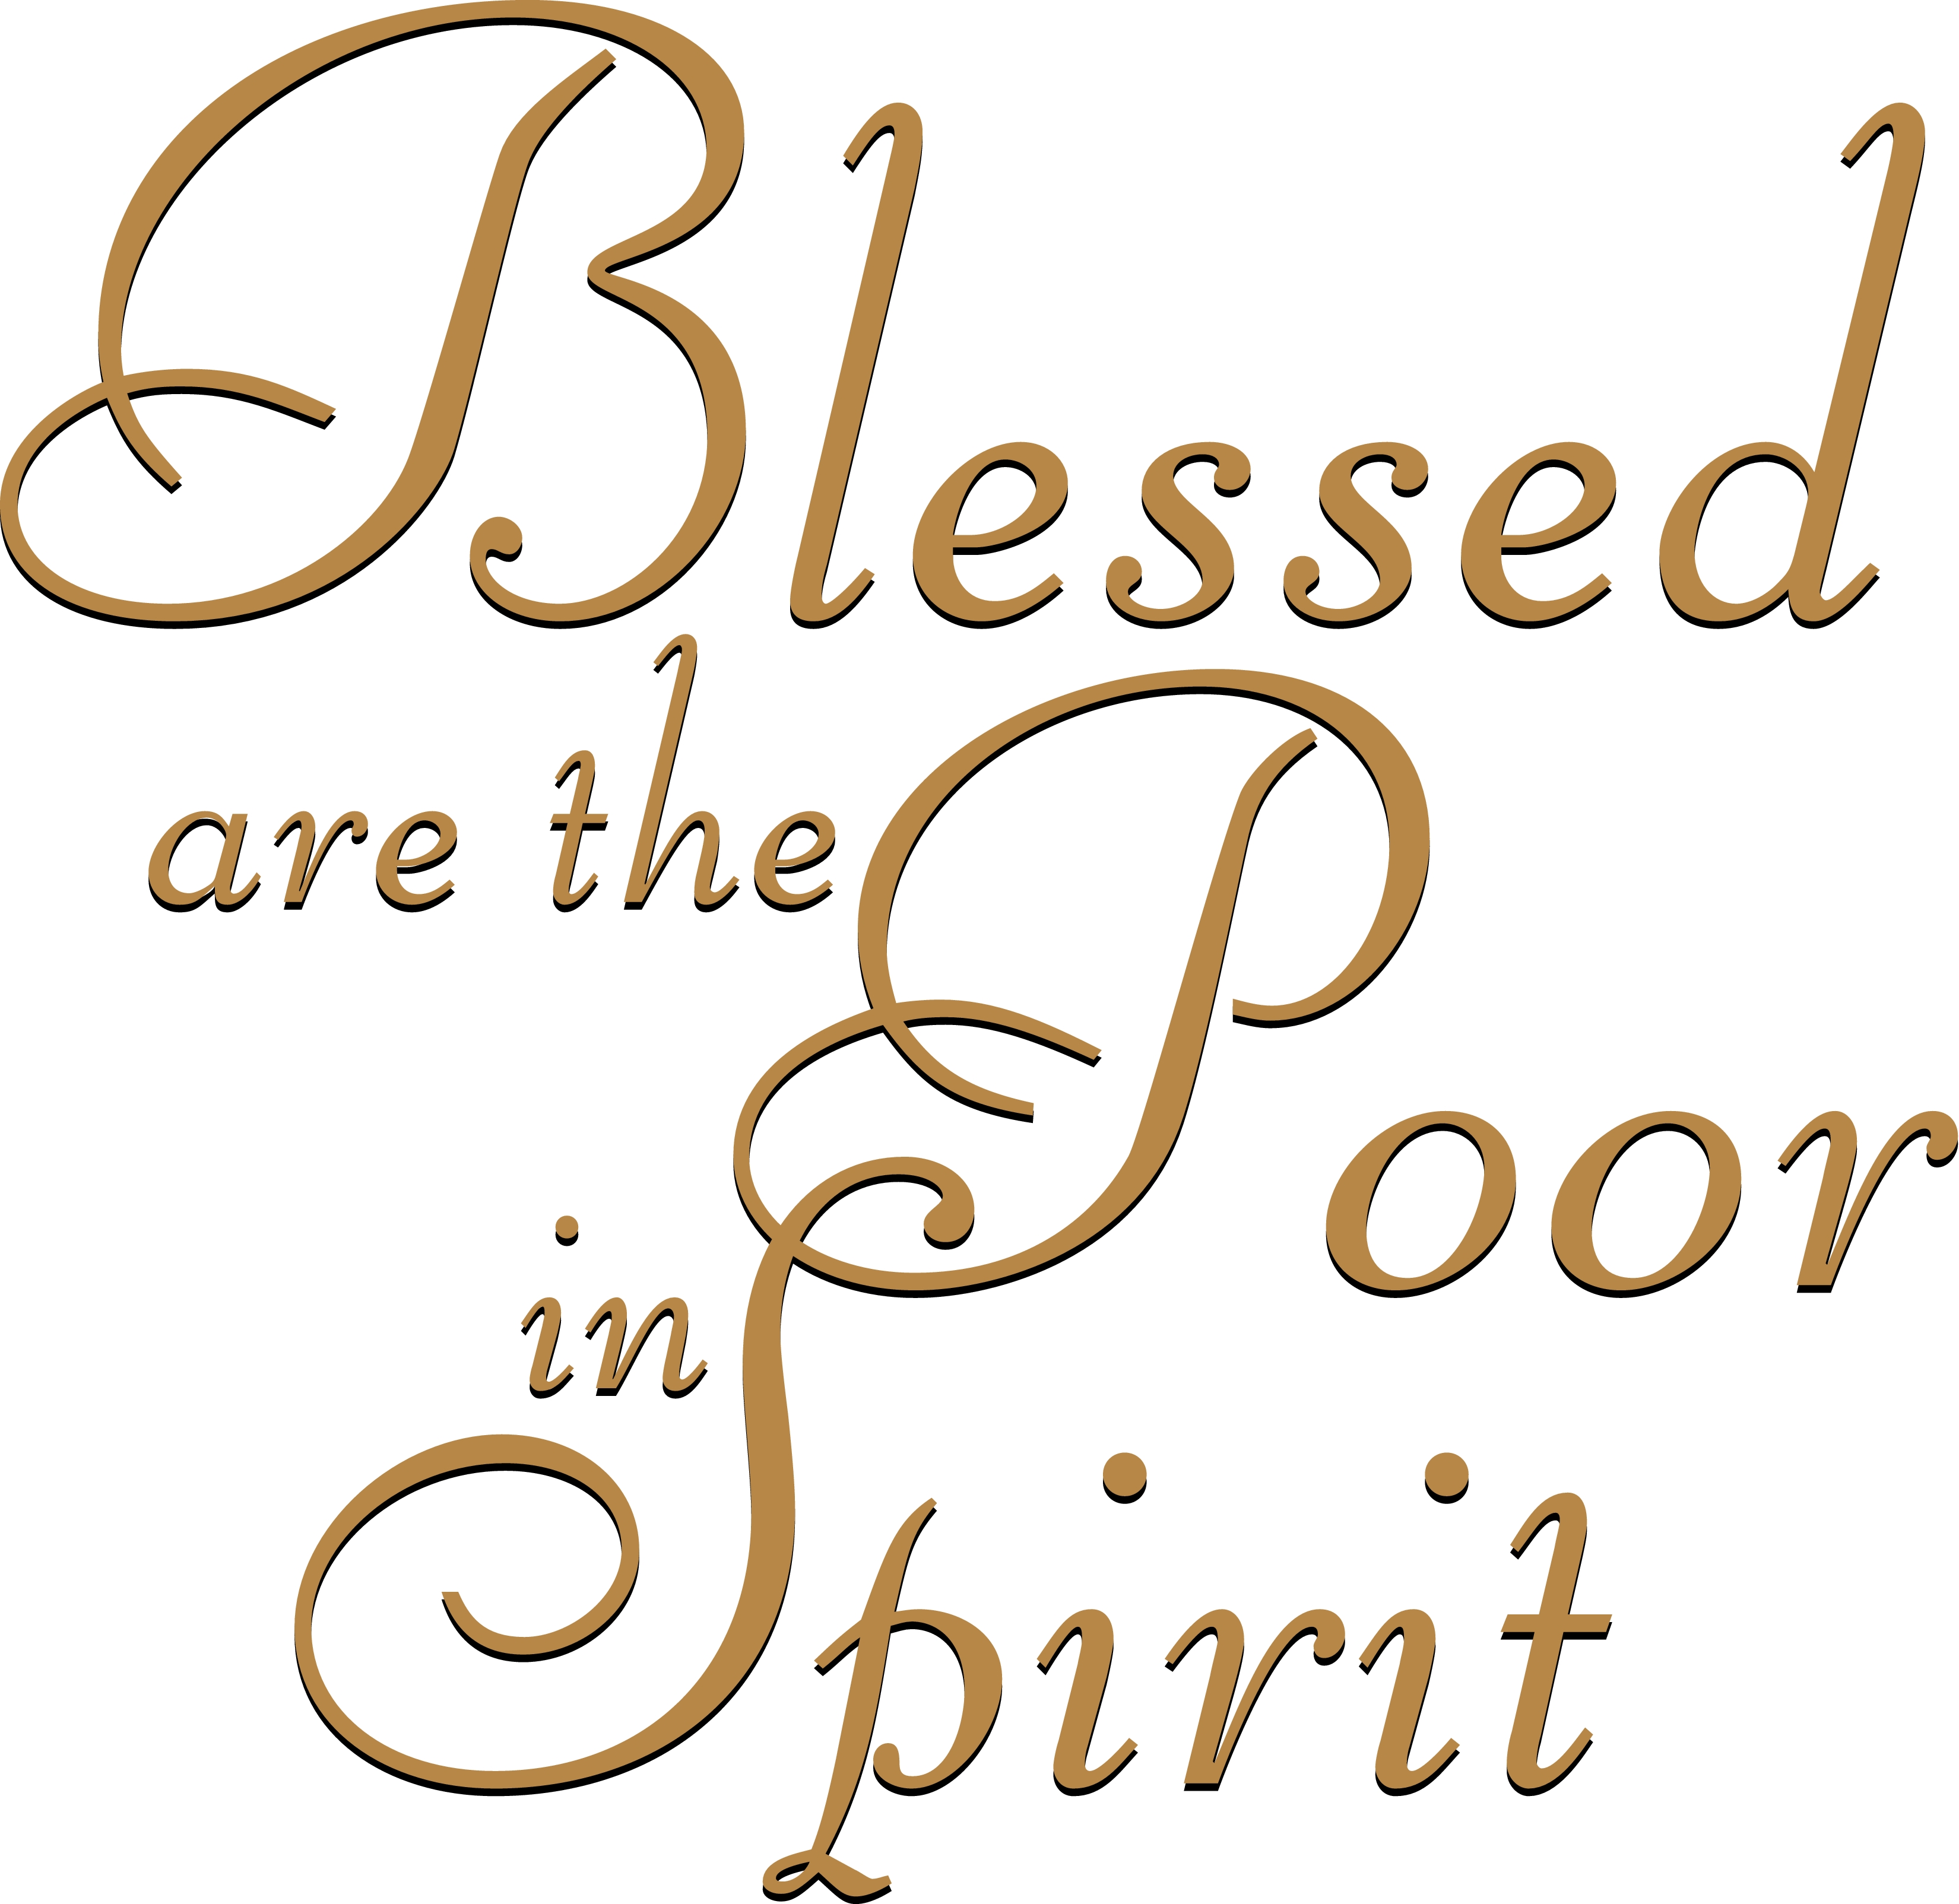 Blessed Are The Poor In Spirit